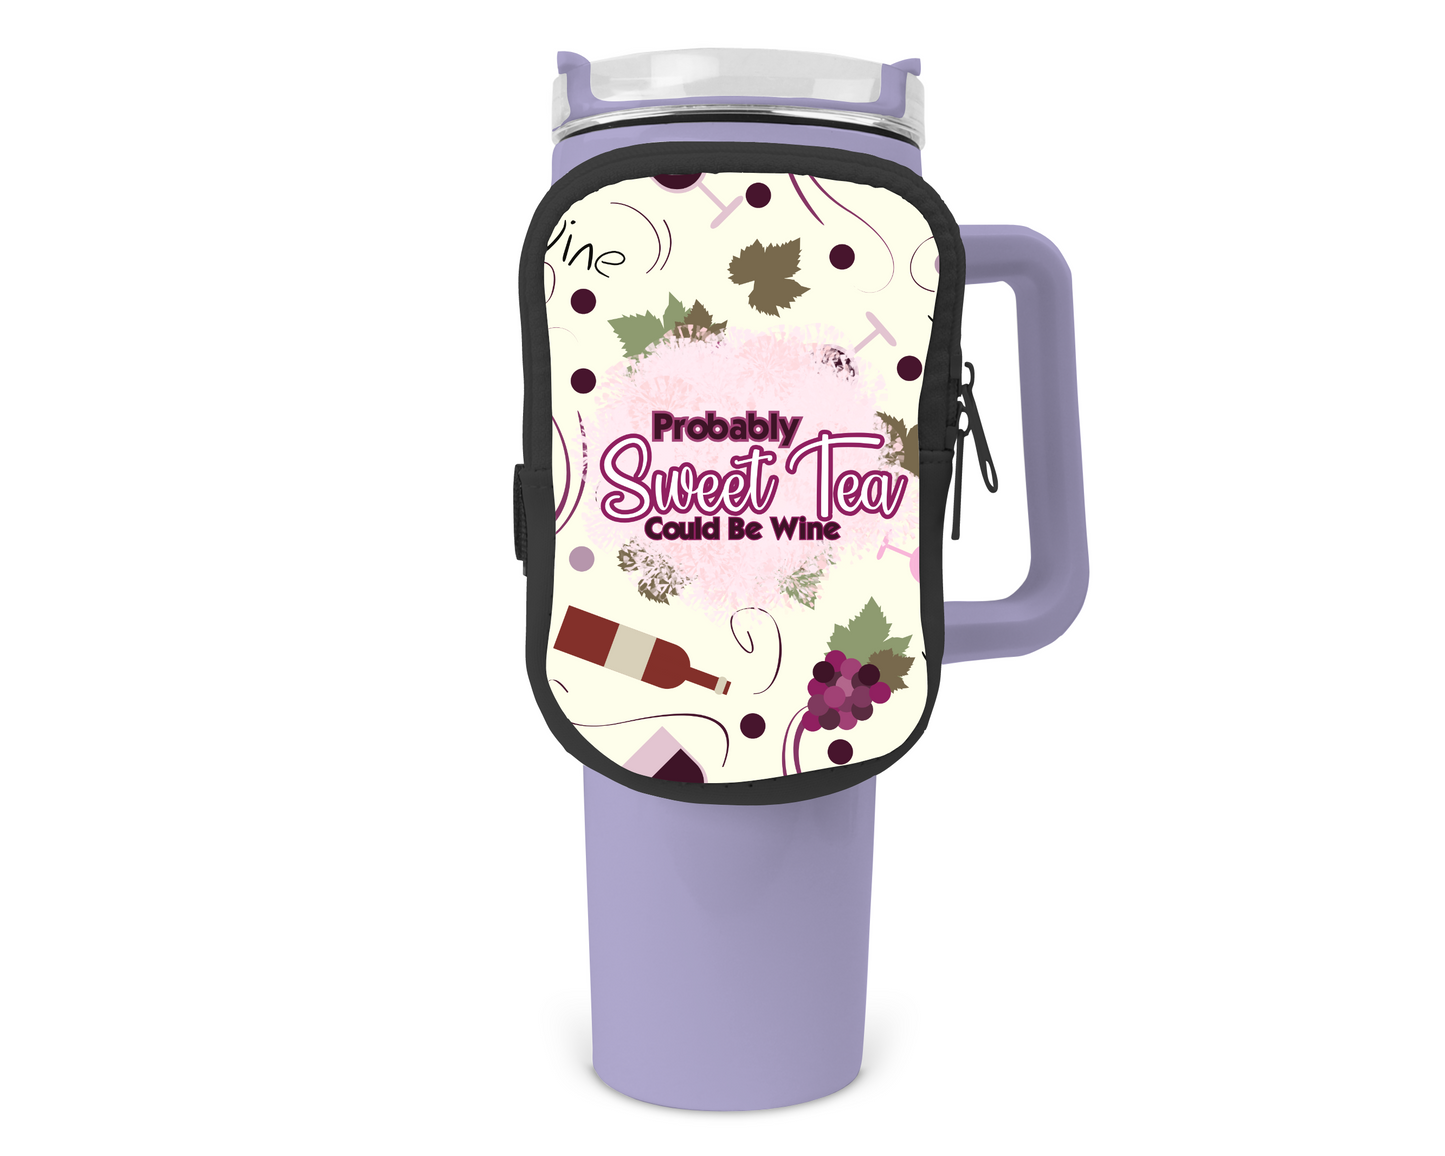 Probably Sweet Tea Could Be Wine Zippered Pouch/Bag For 40oz Tumbler (Bag Only)